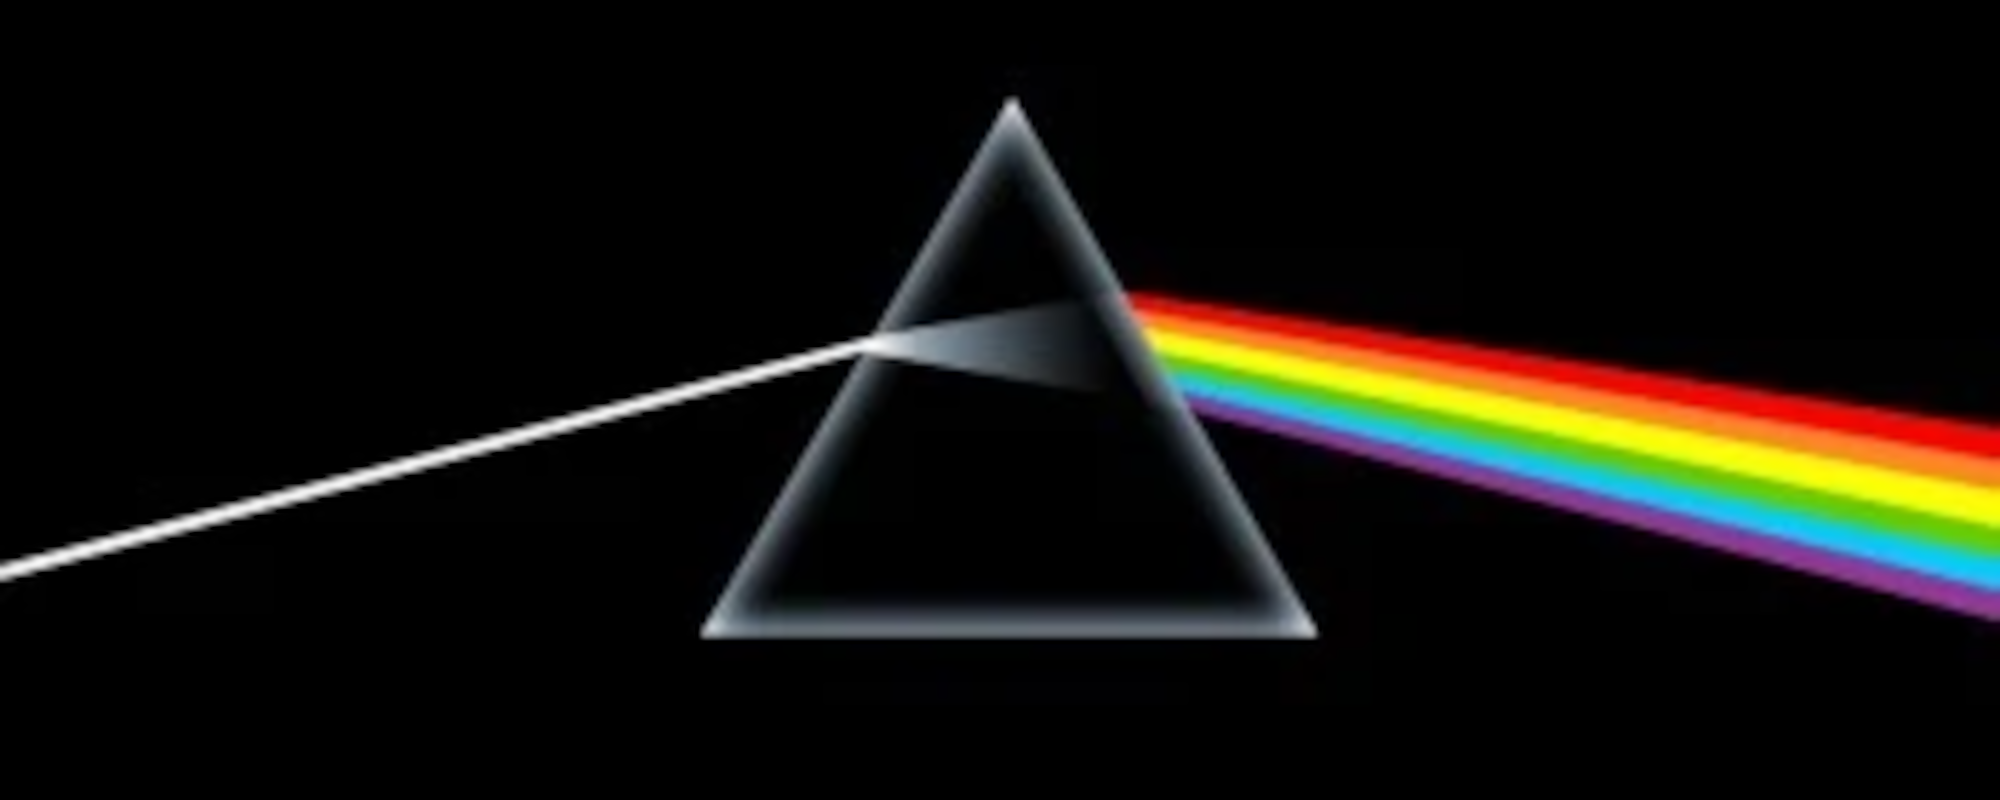 The Story Behind the Album Cover: Pink Floyd's ‘The Dark Side of the Moon’